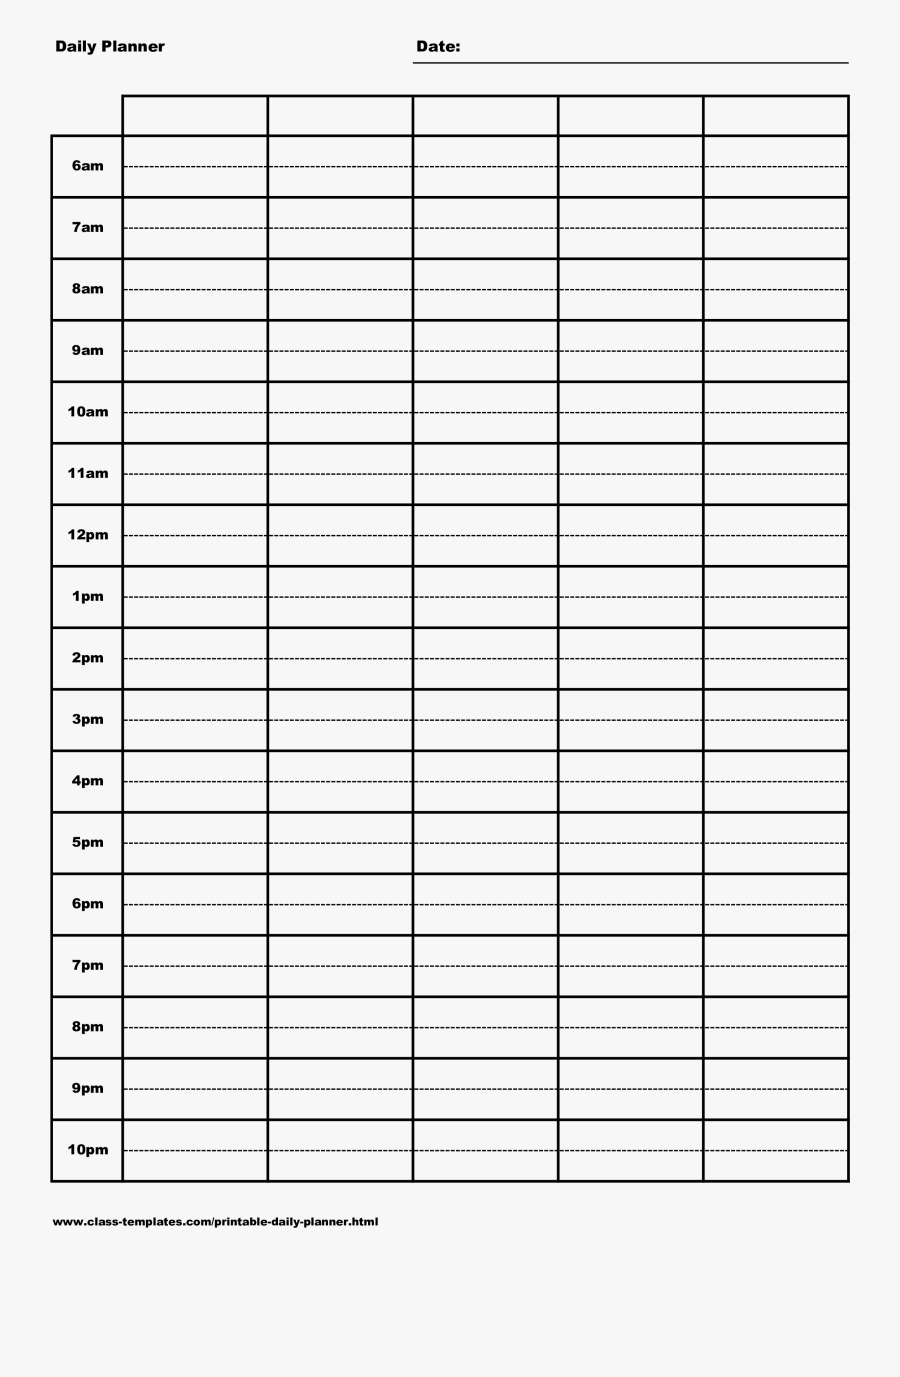 printable-15-minute-schedule-template